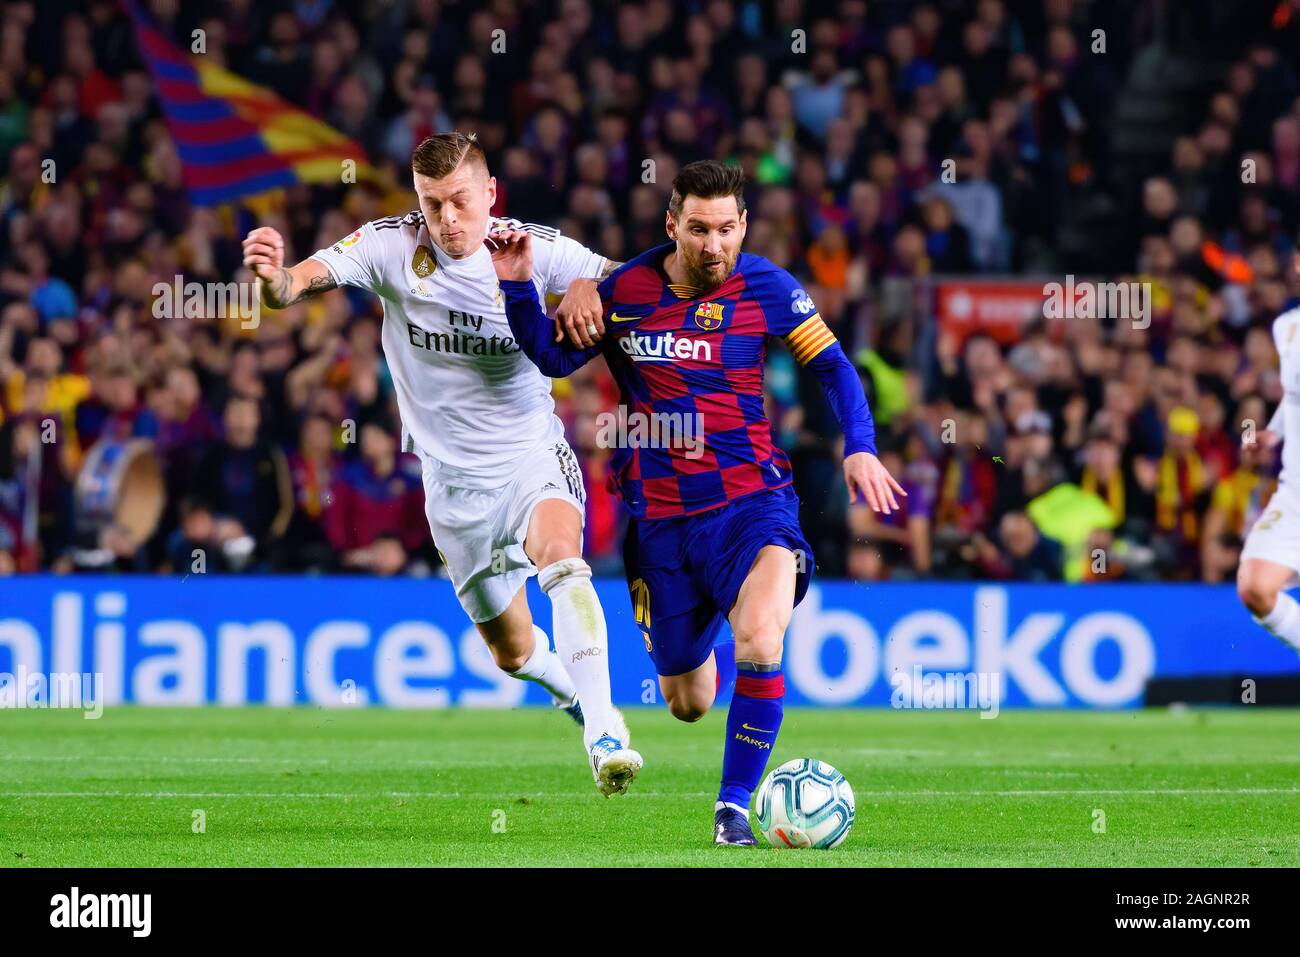 BARCELONA - DEC 18: Kroos (L) and Messi (R) play at the La Liga match between FC Barcelona and Real Madrid at the Camp Nou Stadium on December 18, 201 Stock Photo